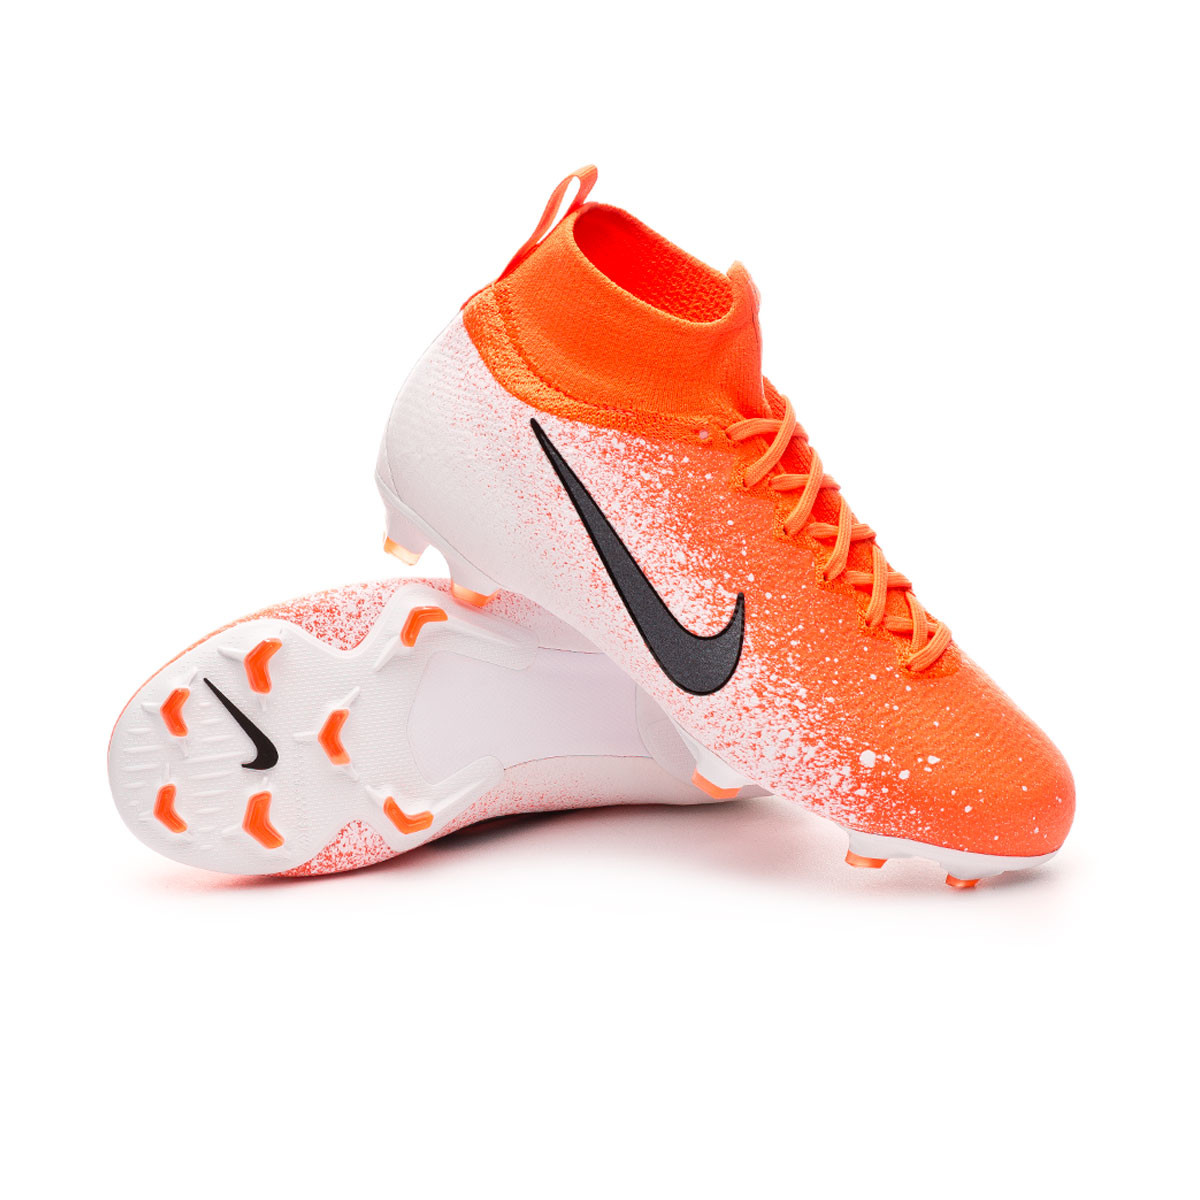 Nike Mercurial Superfly Vi Elite Fg Flash Sales Up To 69 Off